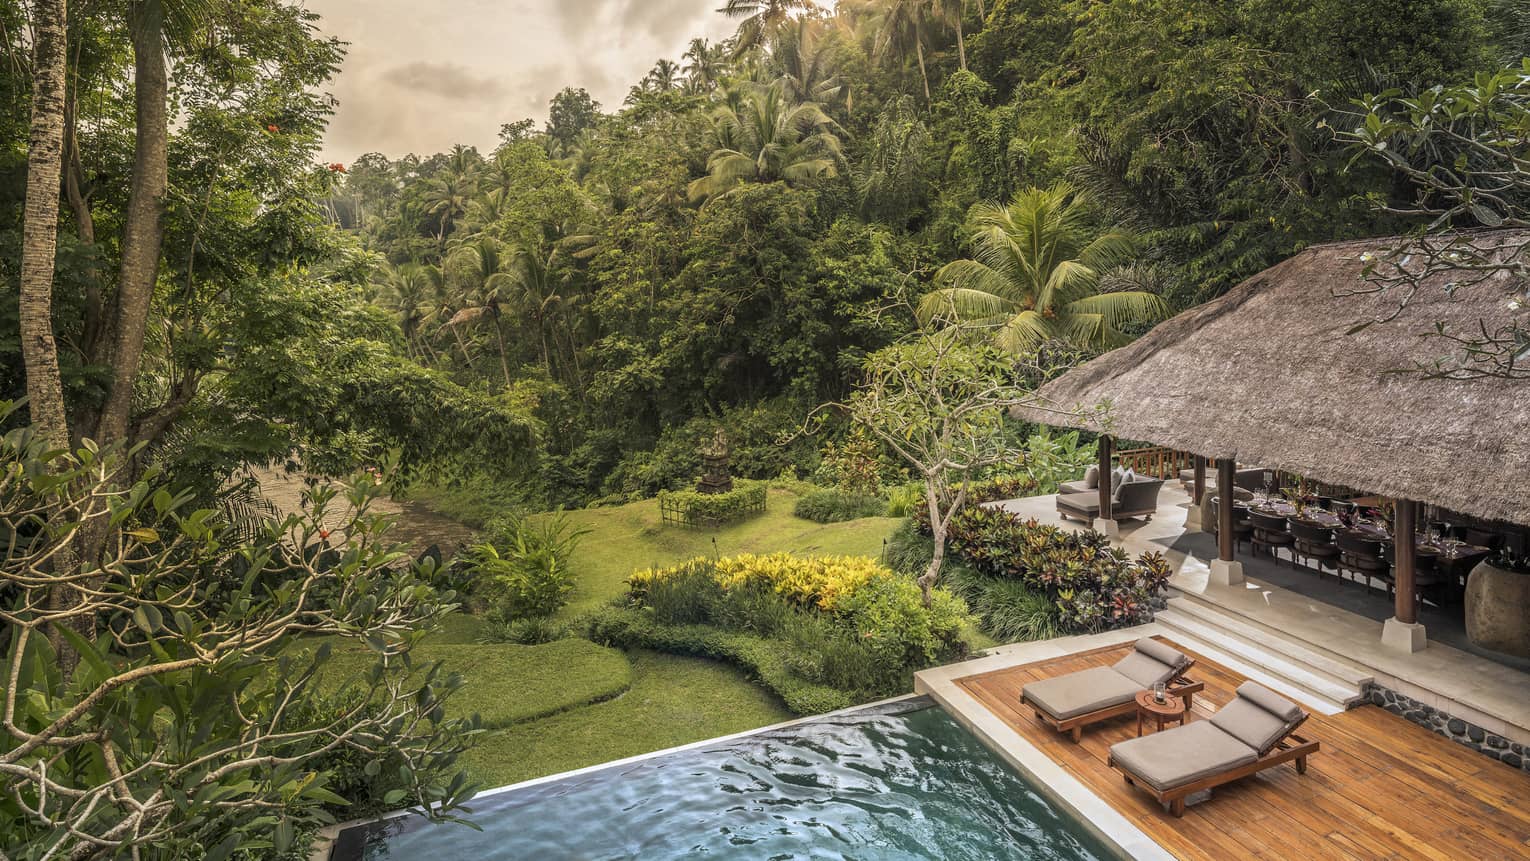 A villa with cushioned chairs and an infinity pool overlooking a river in Bali